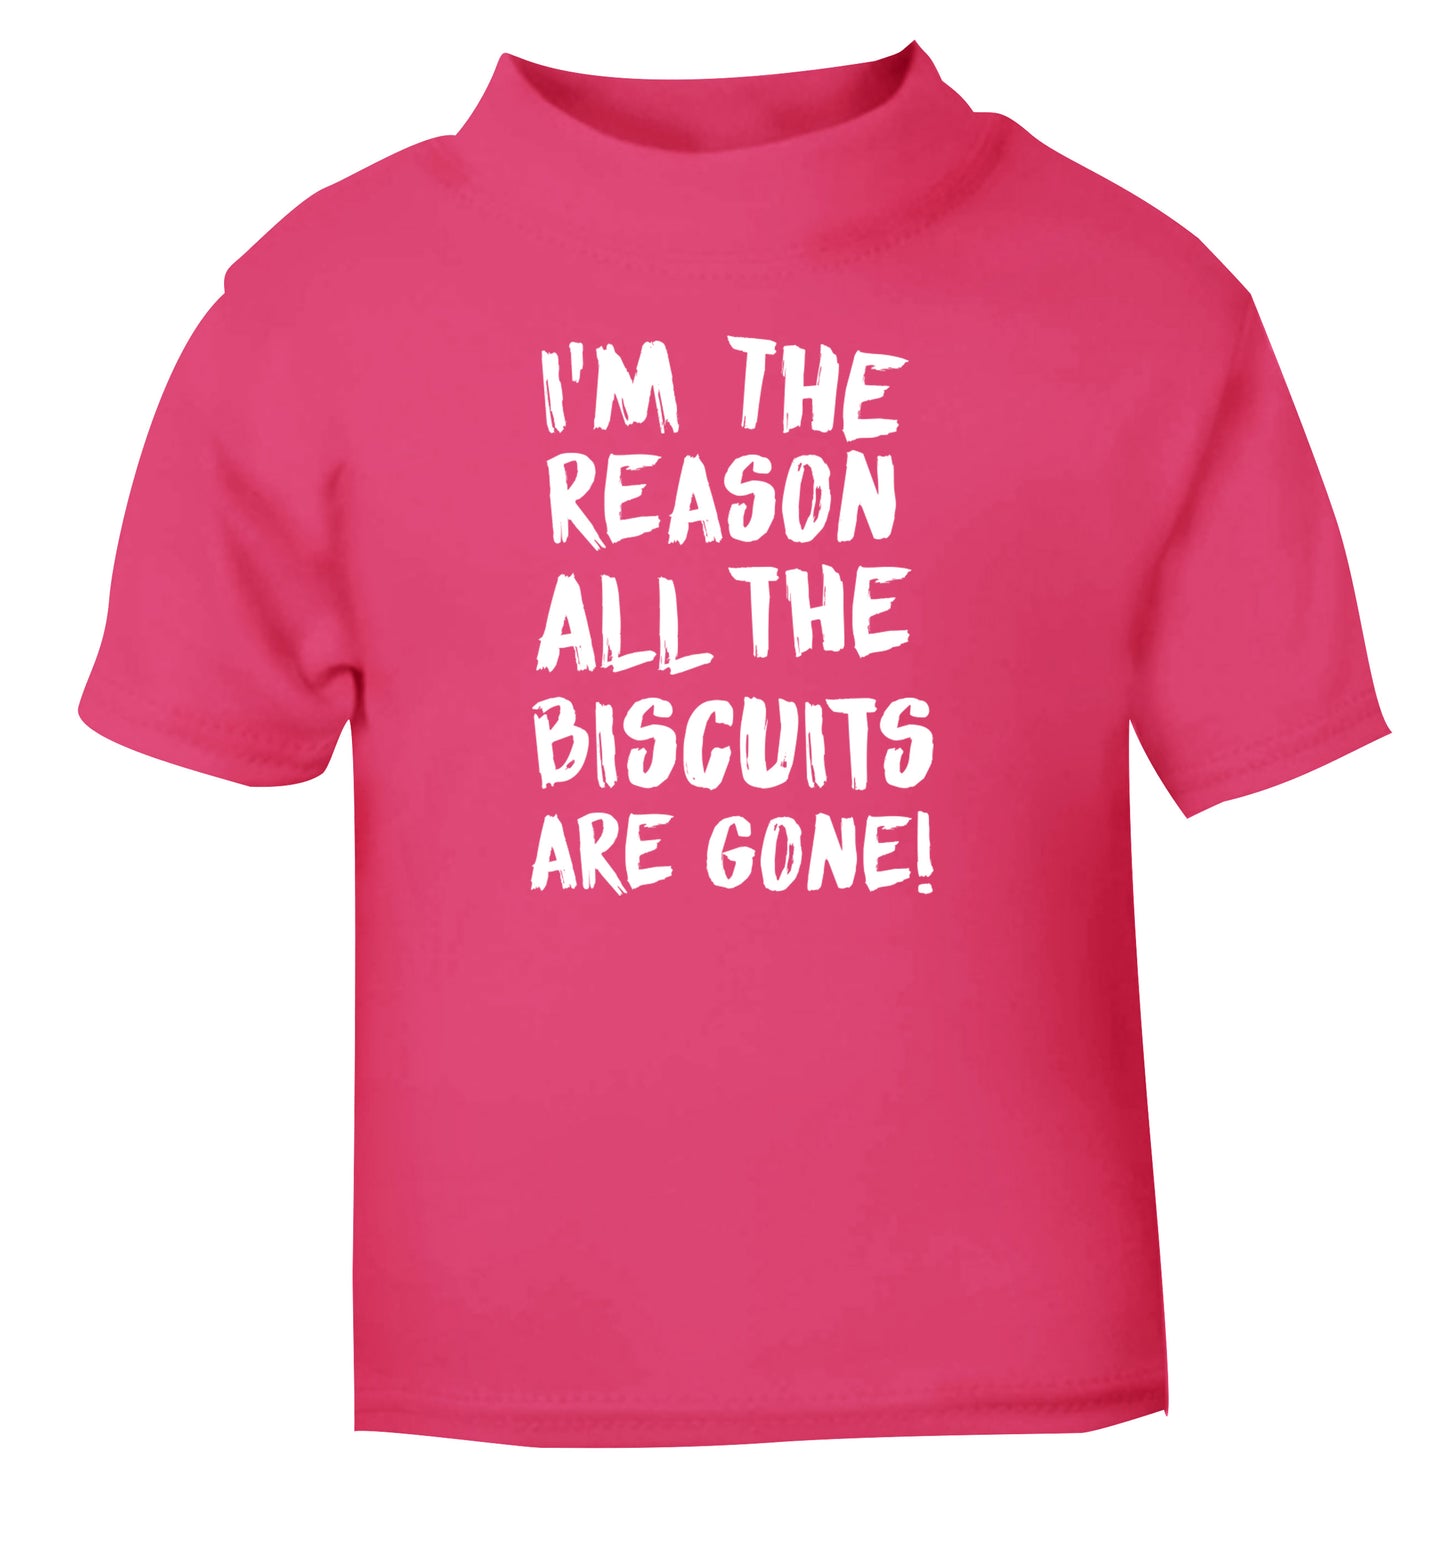 I'm the reason why all the biscuits are gone pink Baby Toddler Tshirt 2 Years